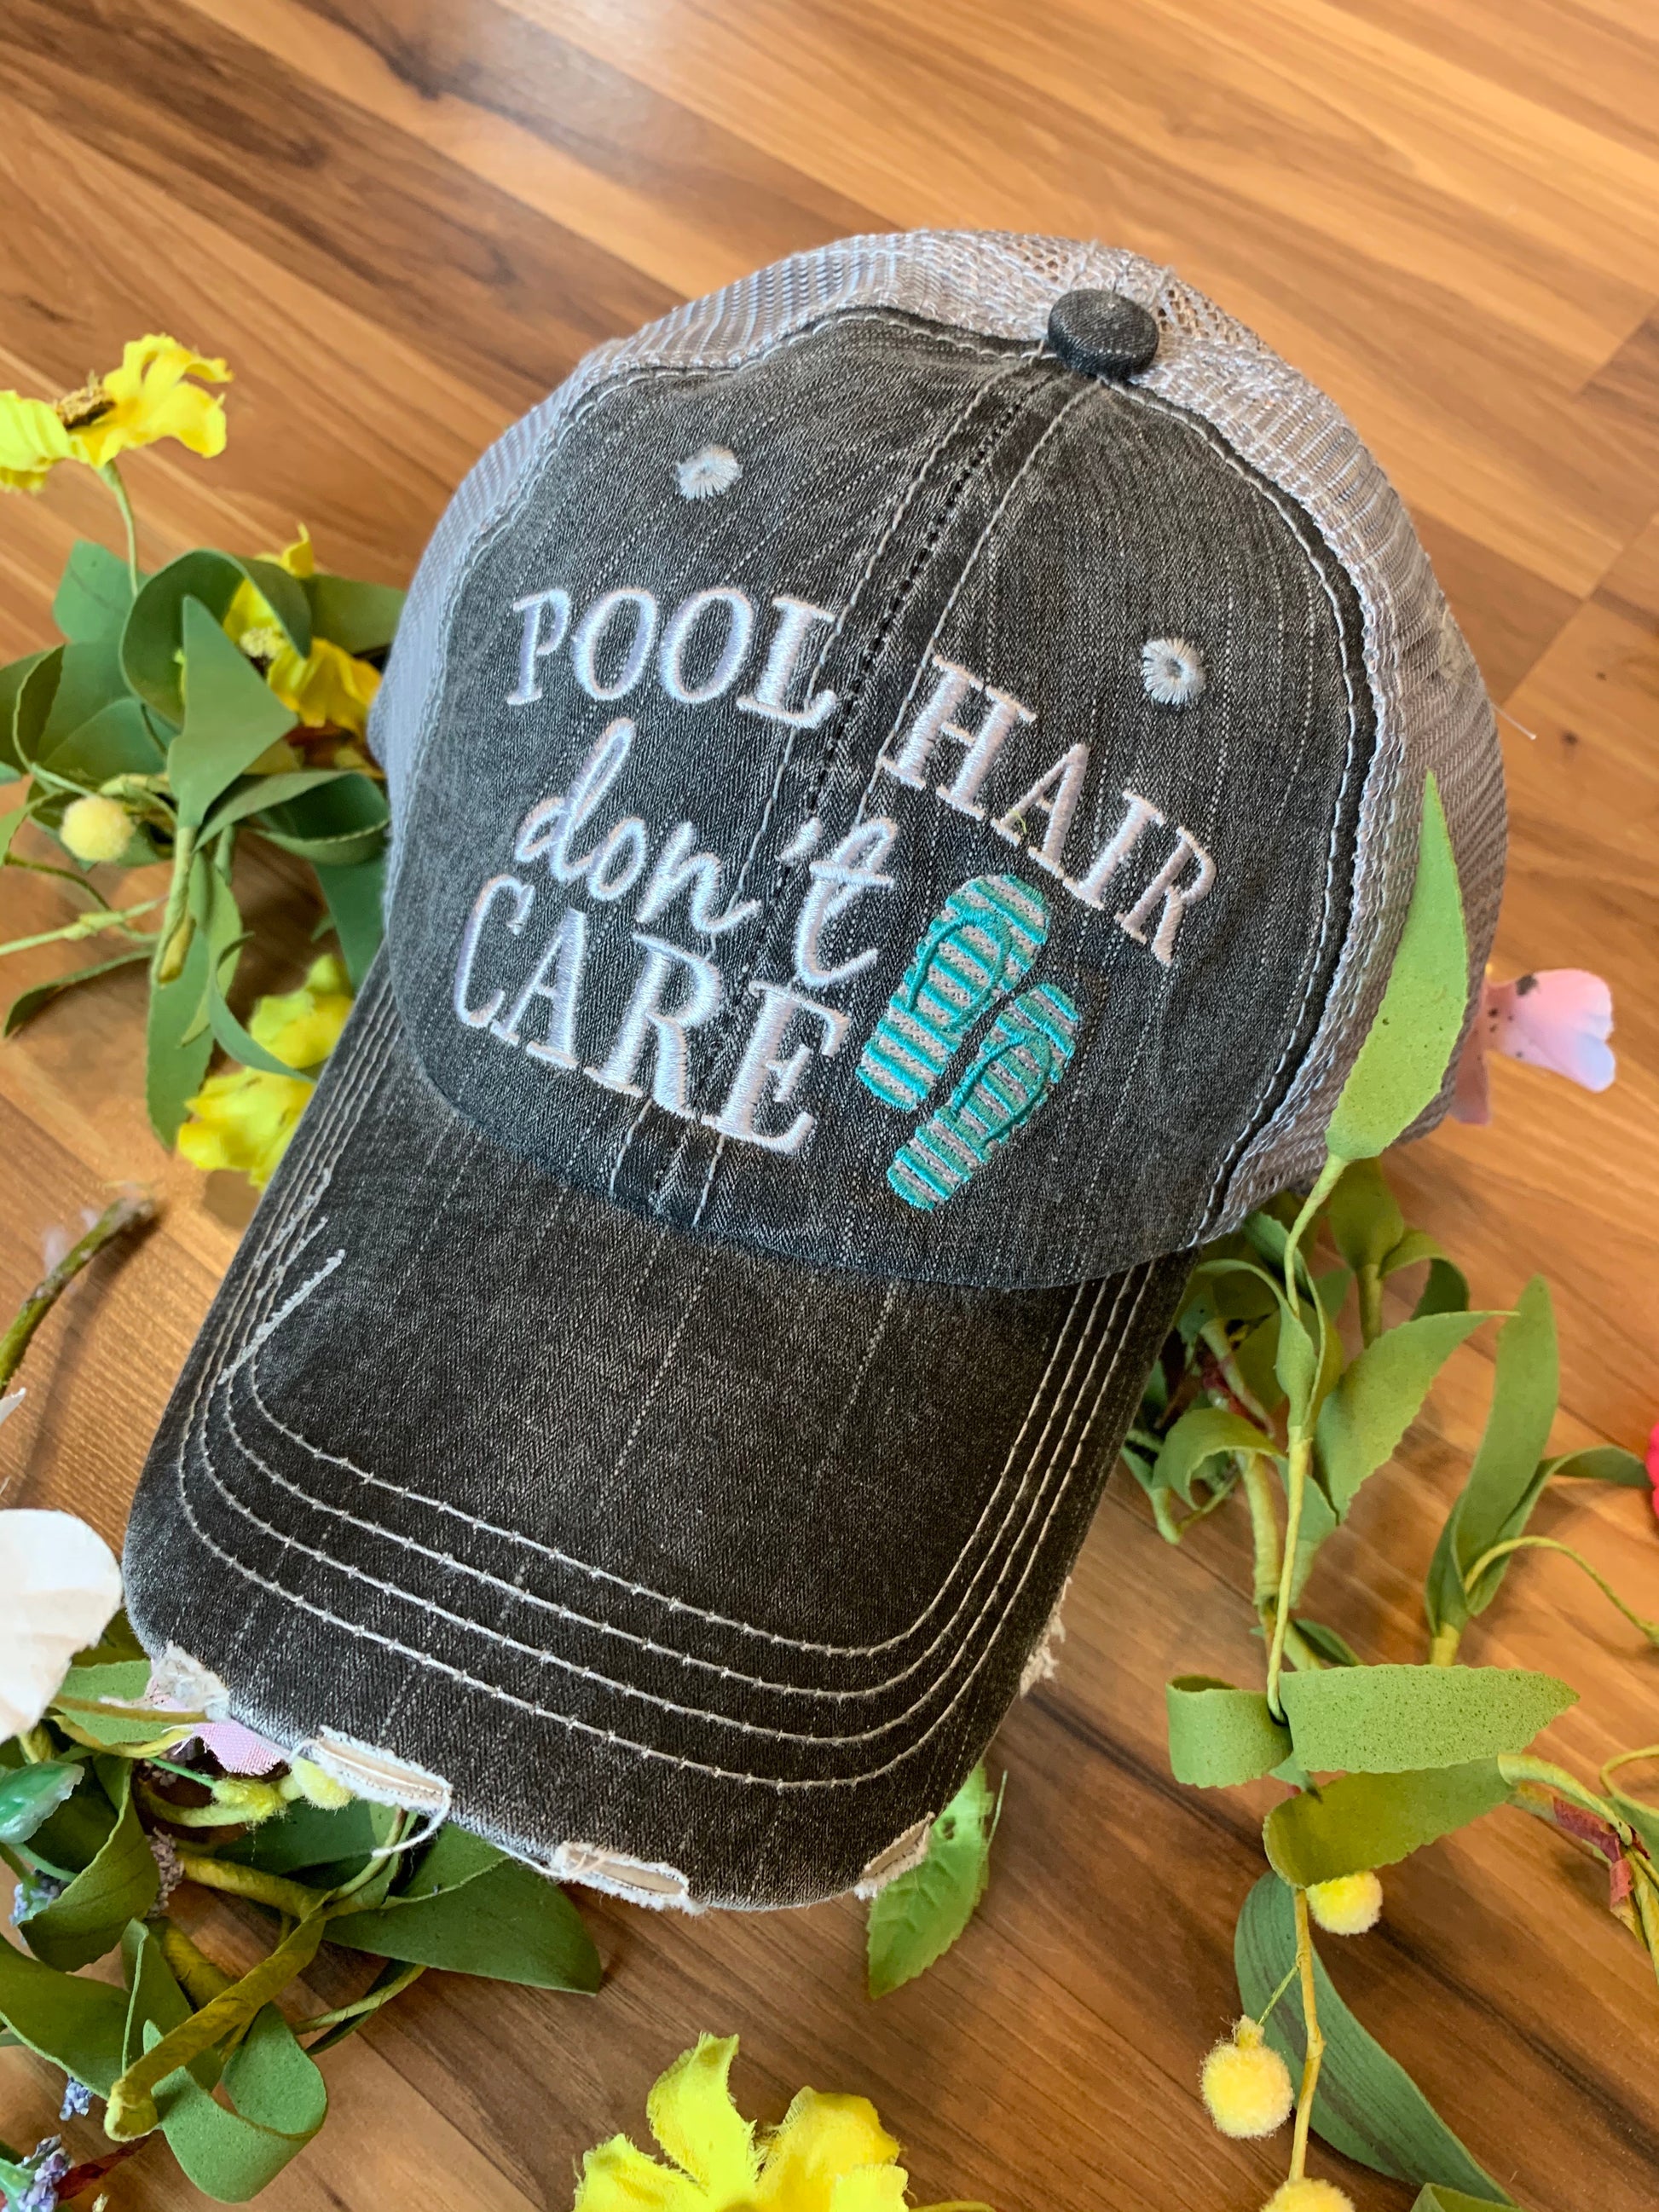 Pool Hats Embroidered Gray Distressed unisex Trucker Caps Pool Hair Dont Care Pool Please Flamingos Flip Flops Pool Hair Dont Care. Gray Hat. Teal